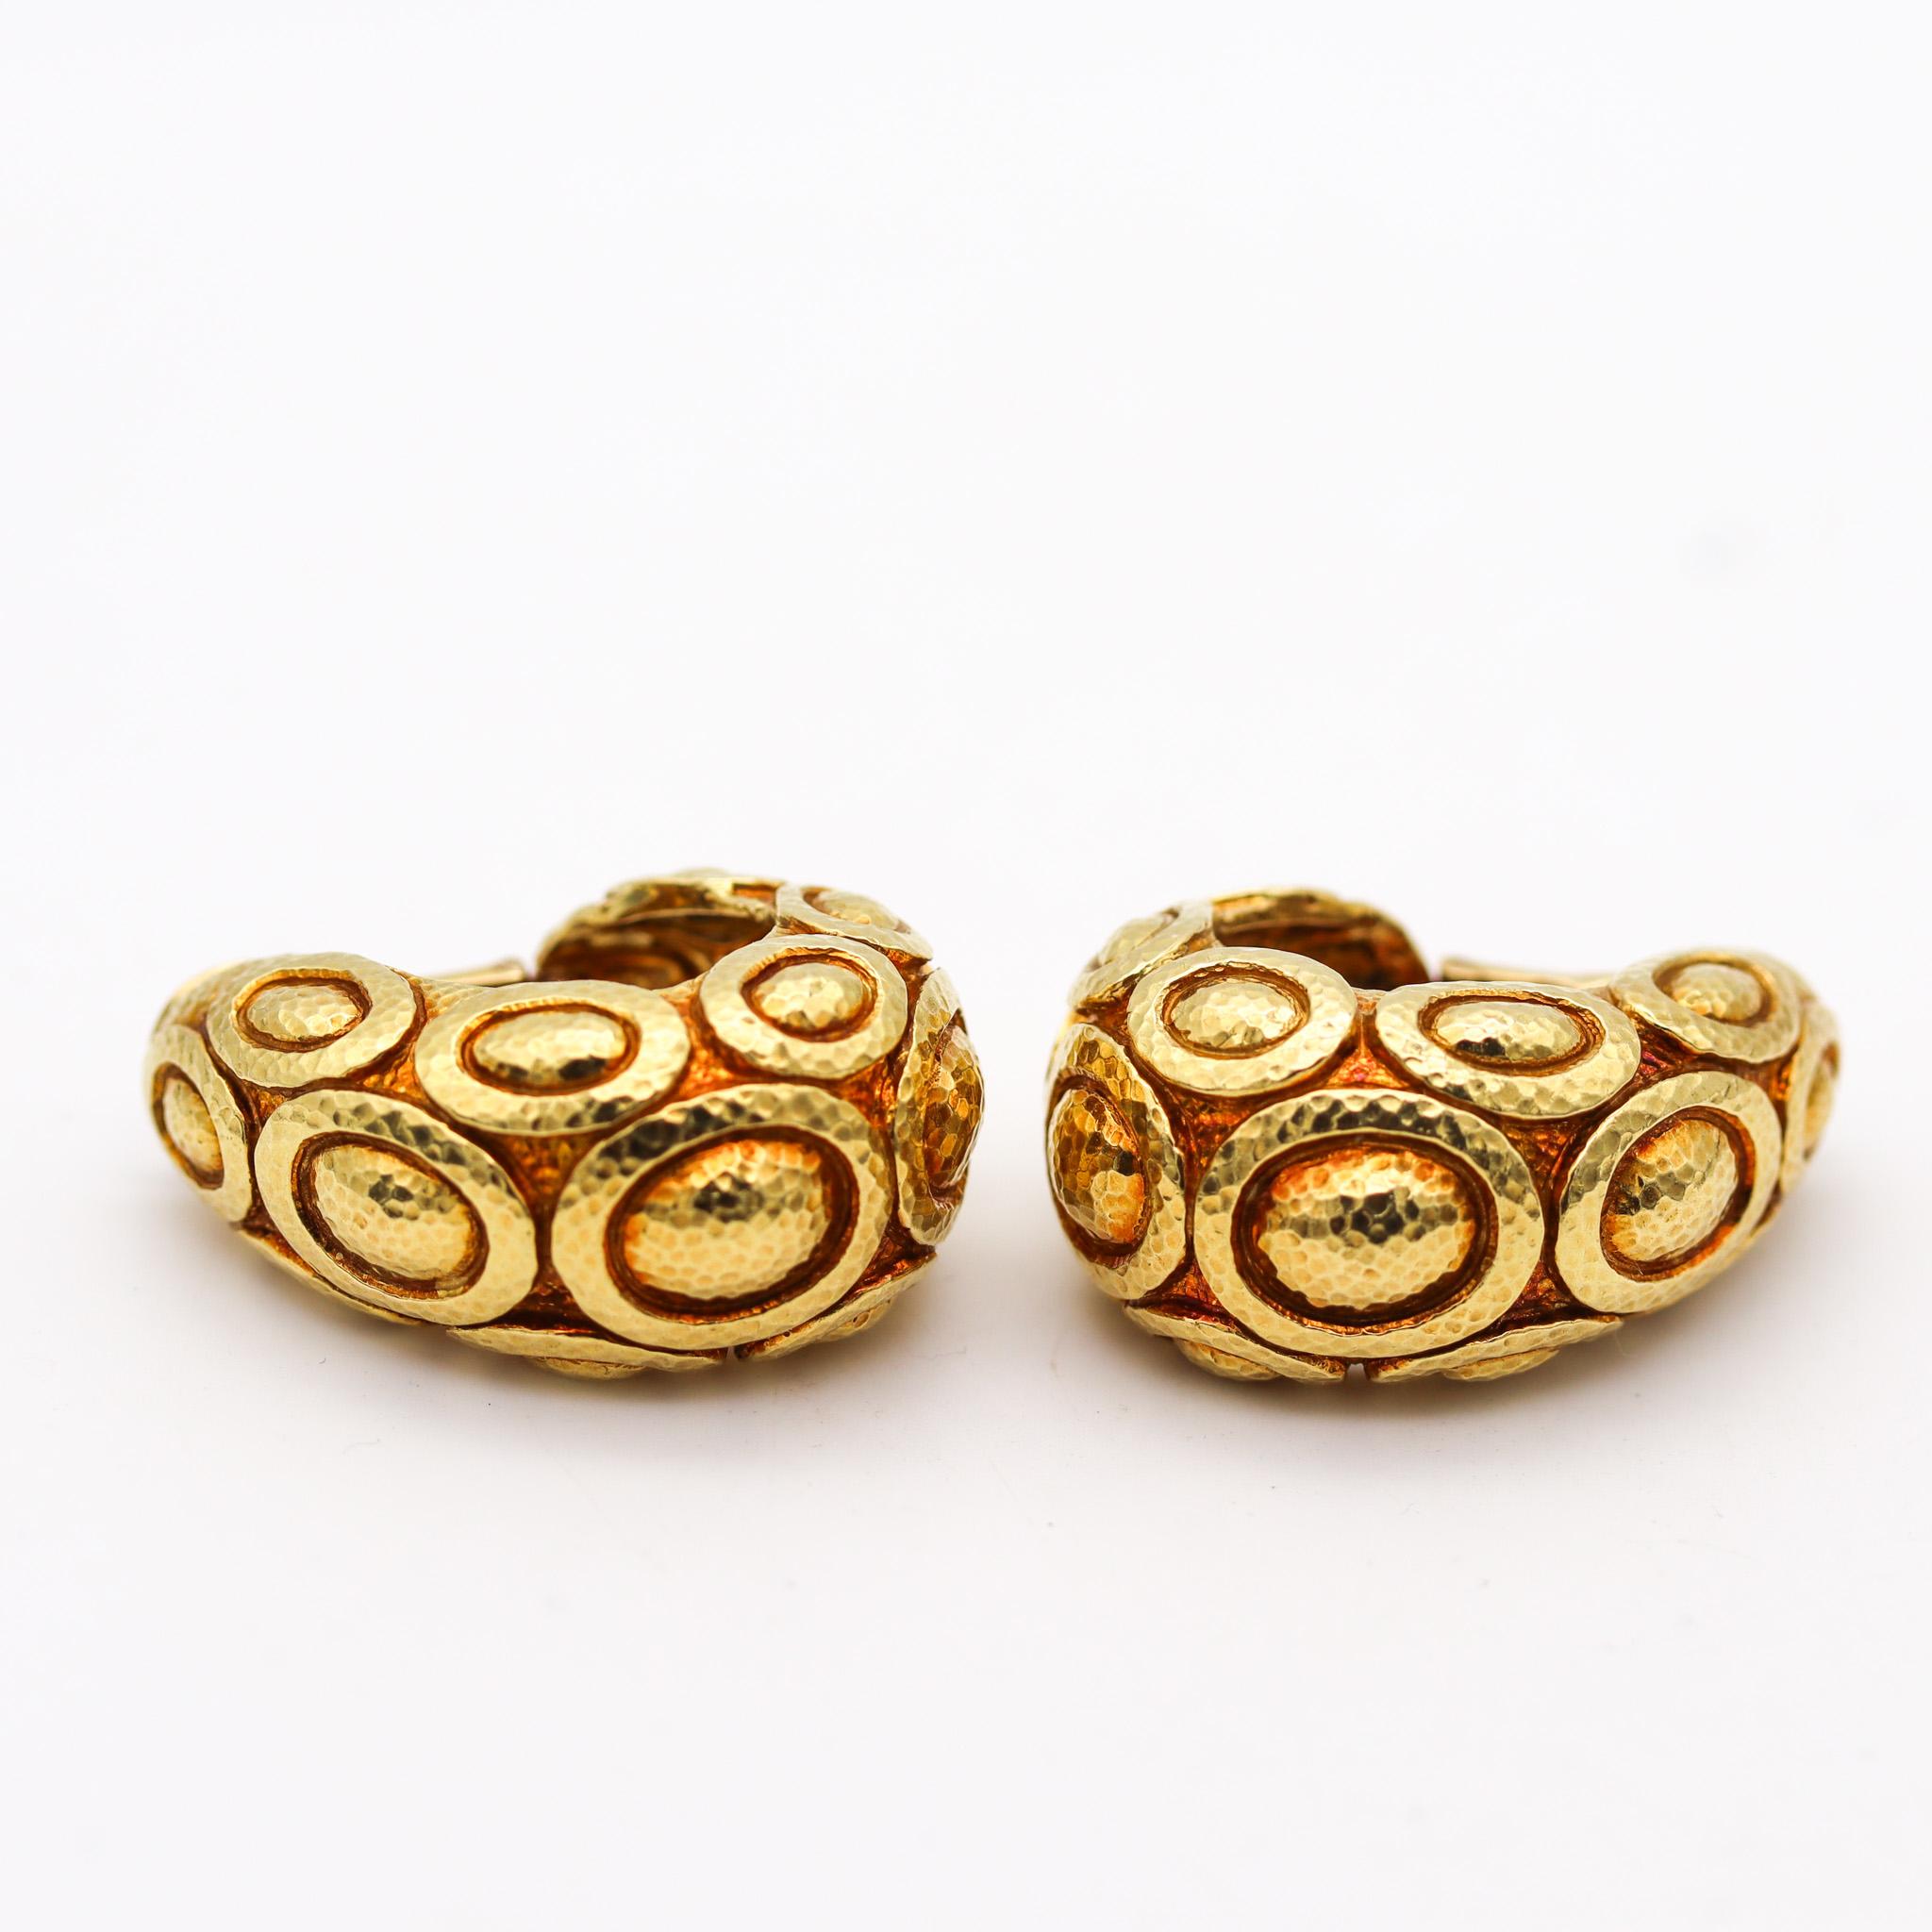 Modernist David Webb 1976 Cased Mayan Hoop Clips Earrings In Solid 18Kt Yellow Gold For Sale